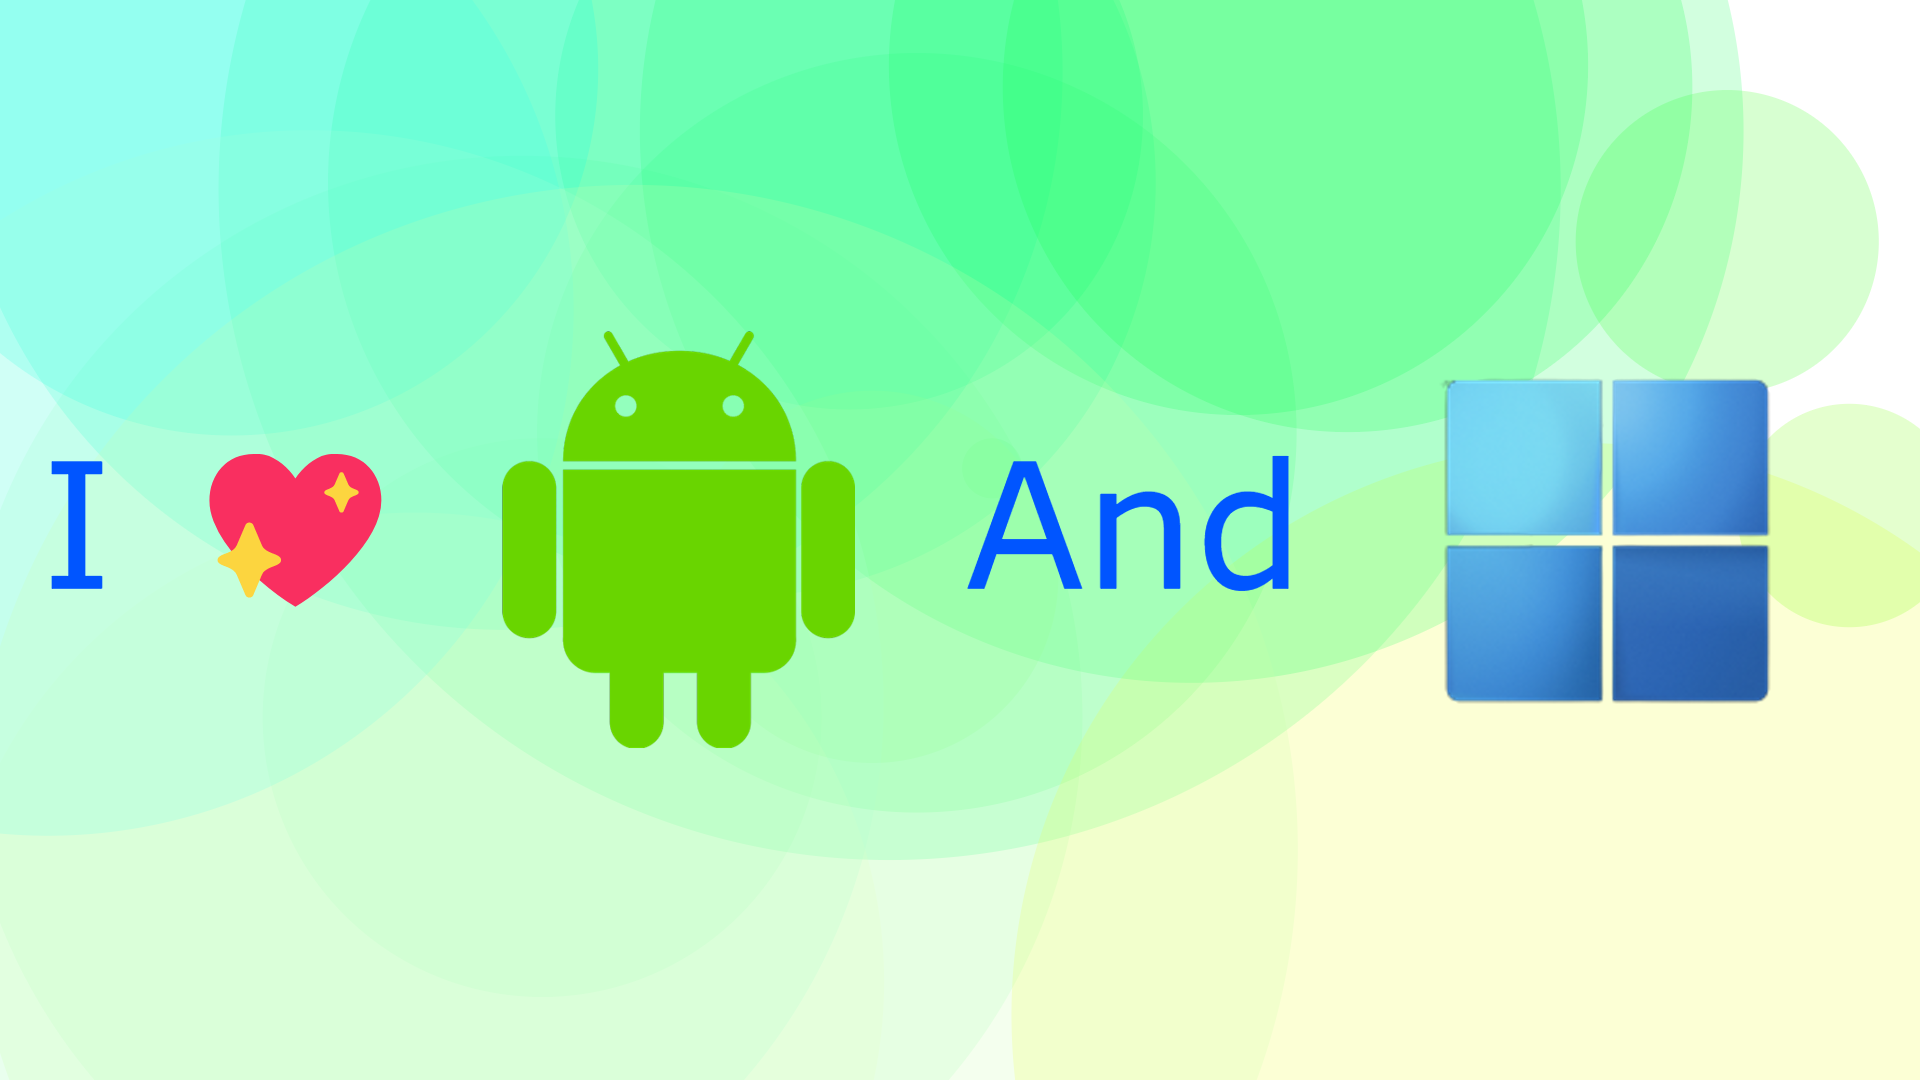 I love Android and Windows!